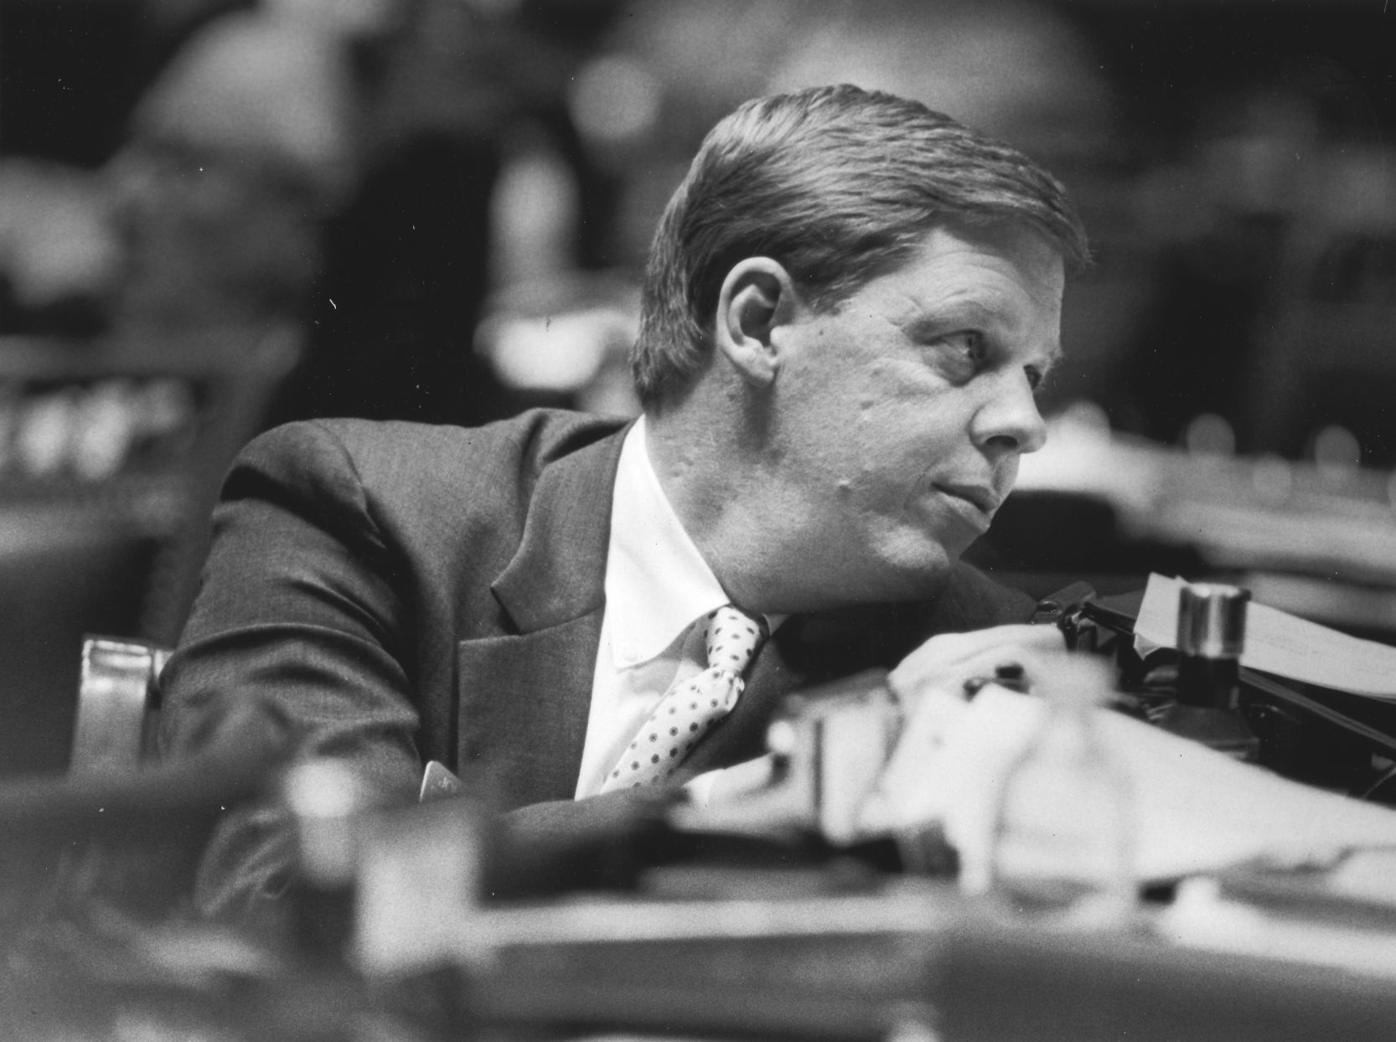 House Rep. Johnny Isakson